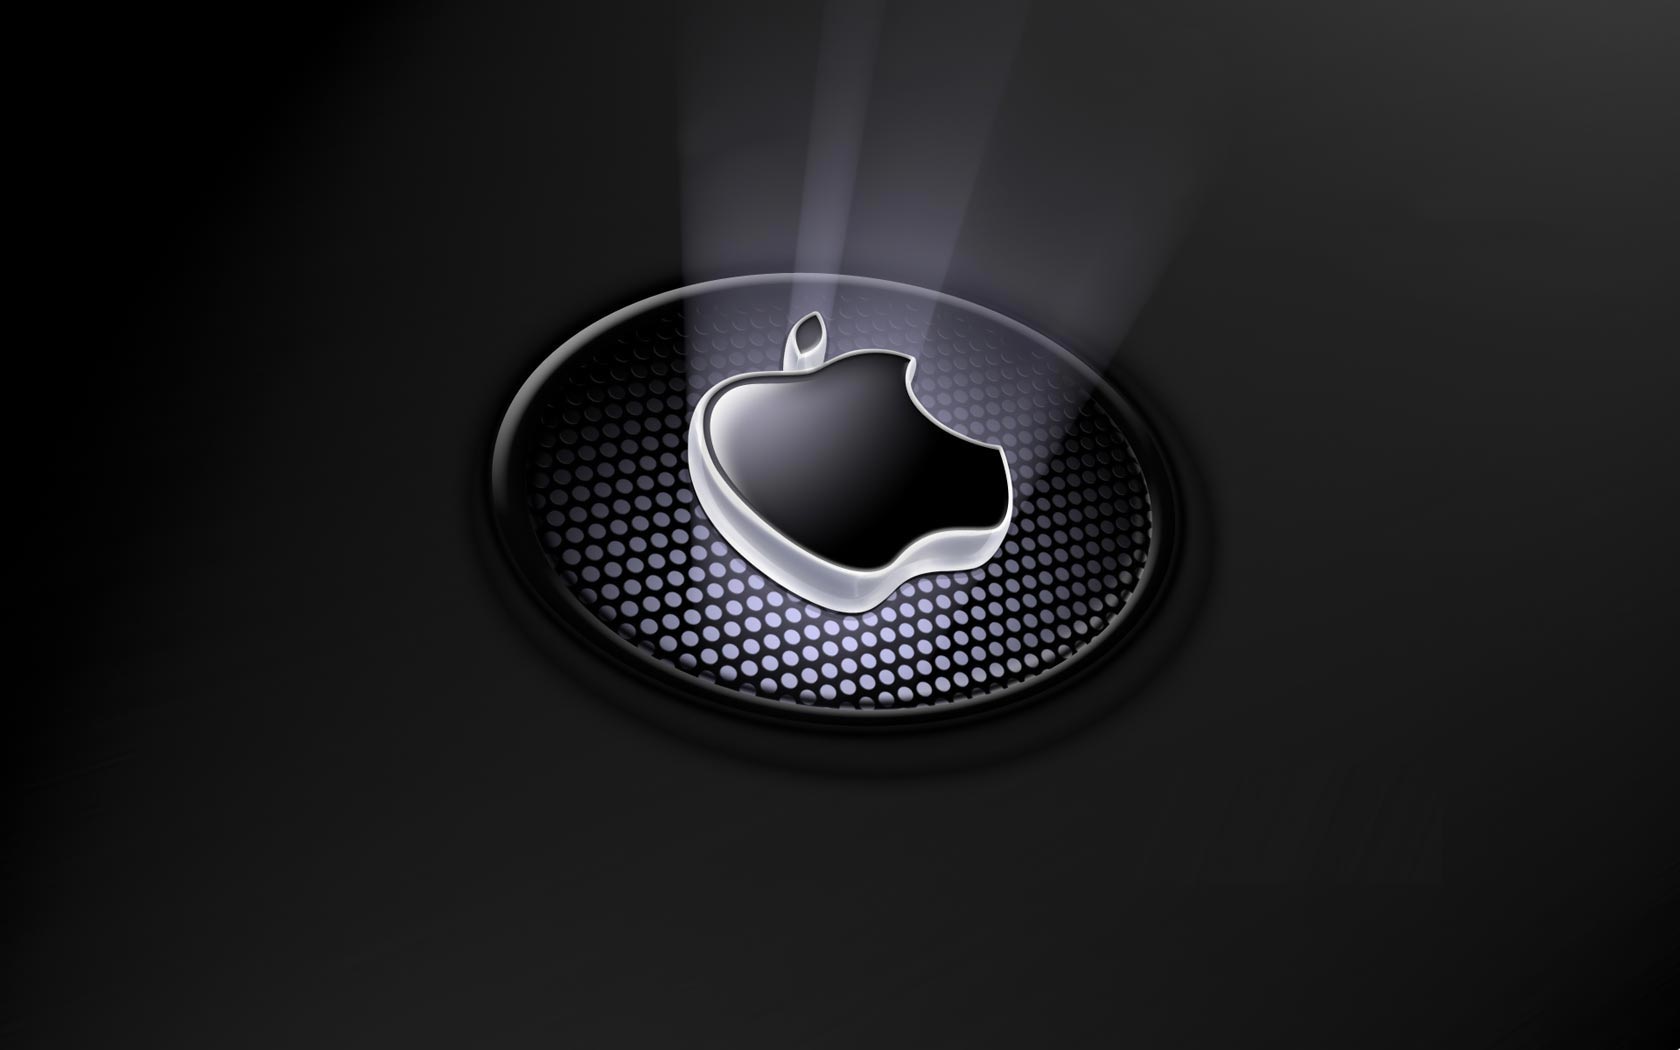  Apple logo backgrounds hd Wallpaper and make this wallpaper for your